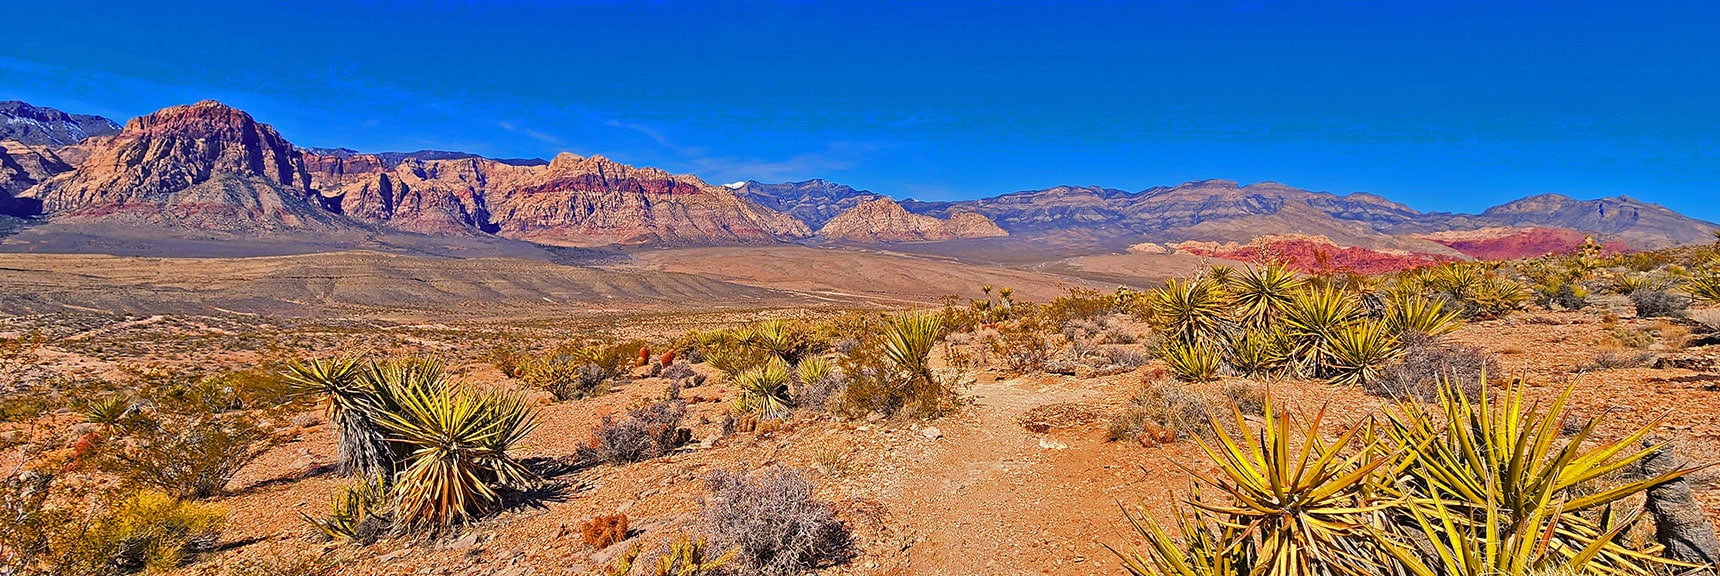 Northern Rainbow Mts., Red Rock Canyon, La Madre Mts., Calico Hills, Damsel Peak | Western Trails and Ridges | Blue Diamond Hill | Red Rock Canyon, Nevada